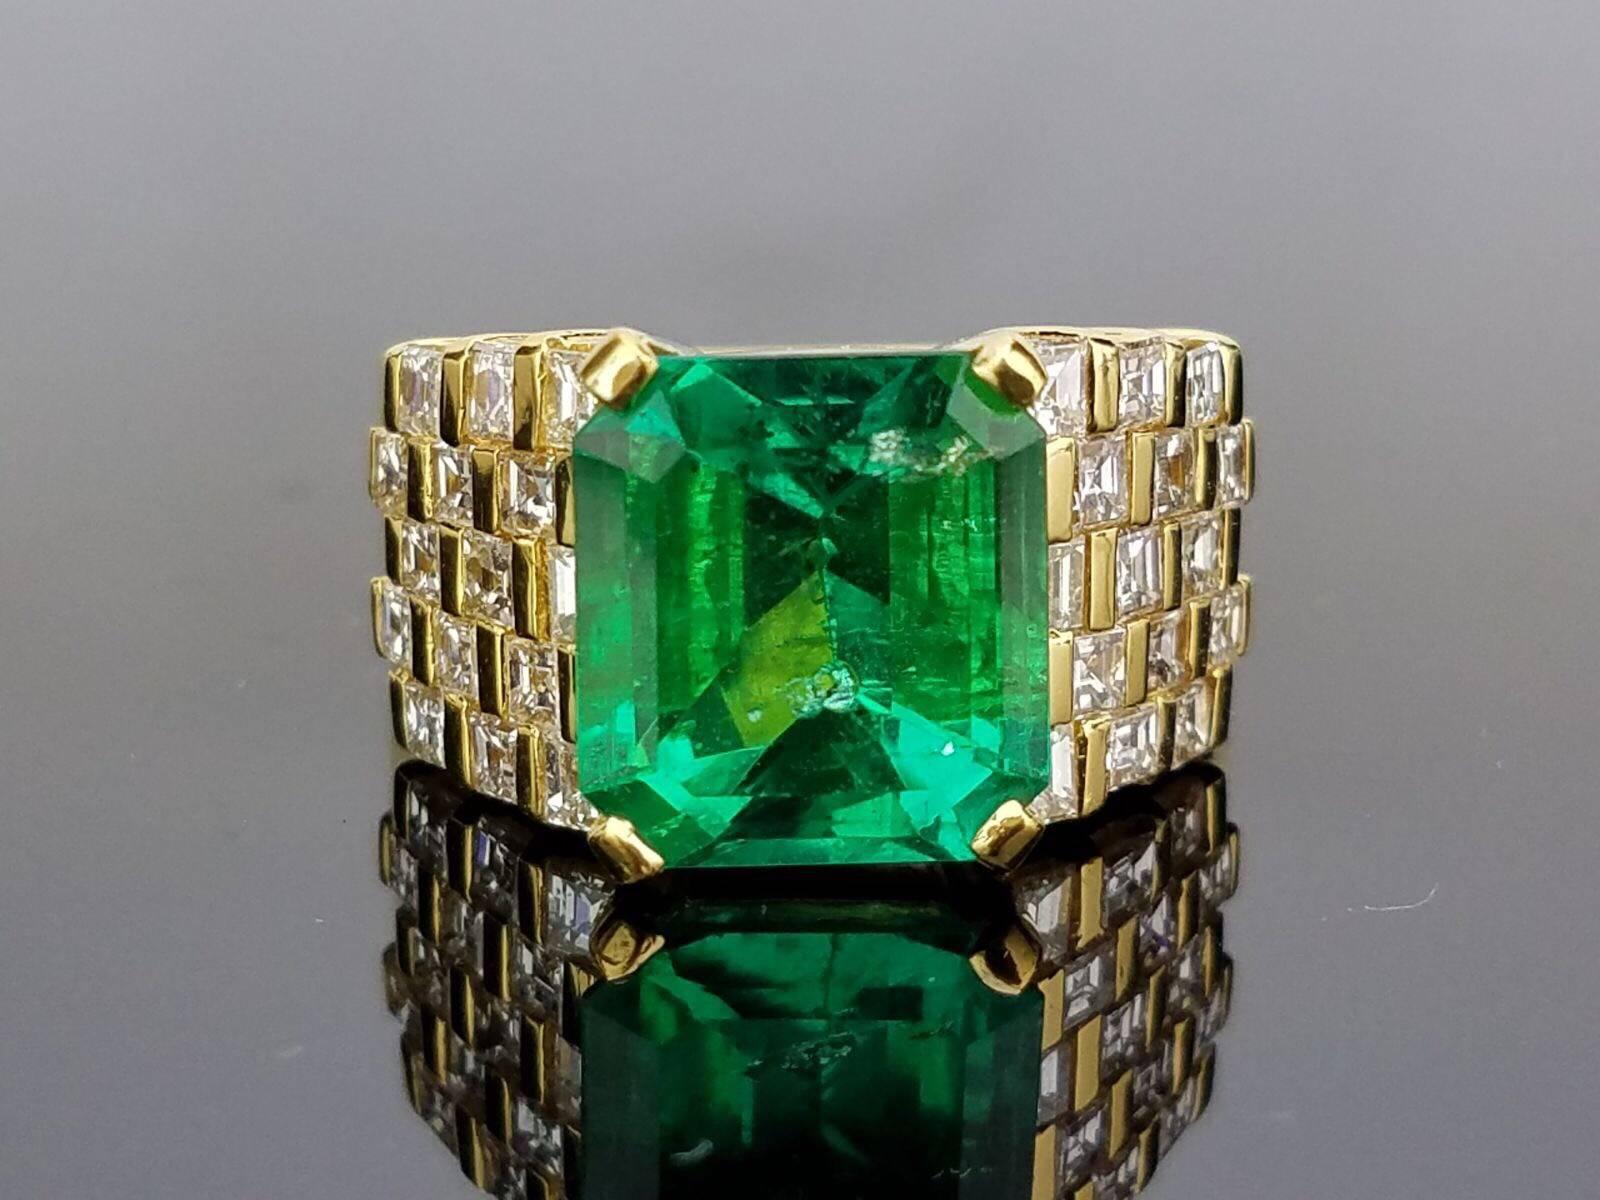 Beautiful Colombian Emerald and Diamond Ring set in 18K Gold 

Stone Details: 
Stone: Colombian Emerald
Cut: Emerald Cut
Carat Weight: 5.61 Carat

Diamond Details:
Cut: Princess
Total Carat Weight: 1.82
Quality: VS/SI , H/I

18K Gold: 11.73 grams